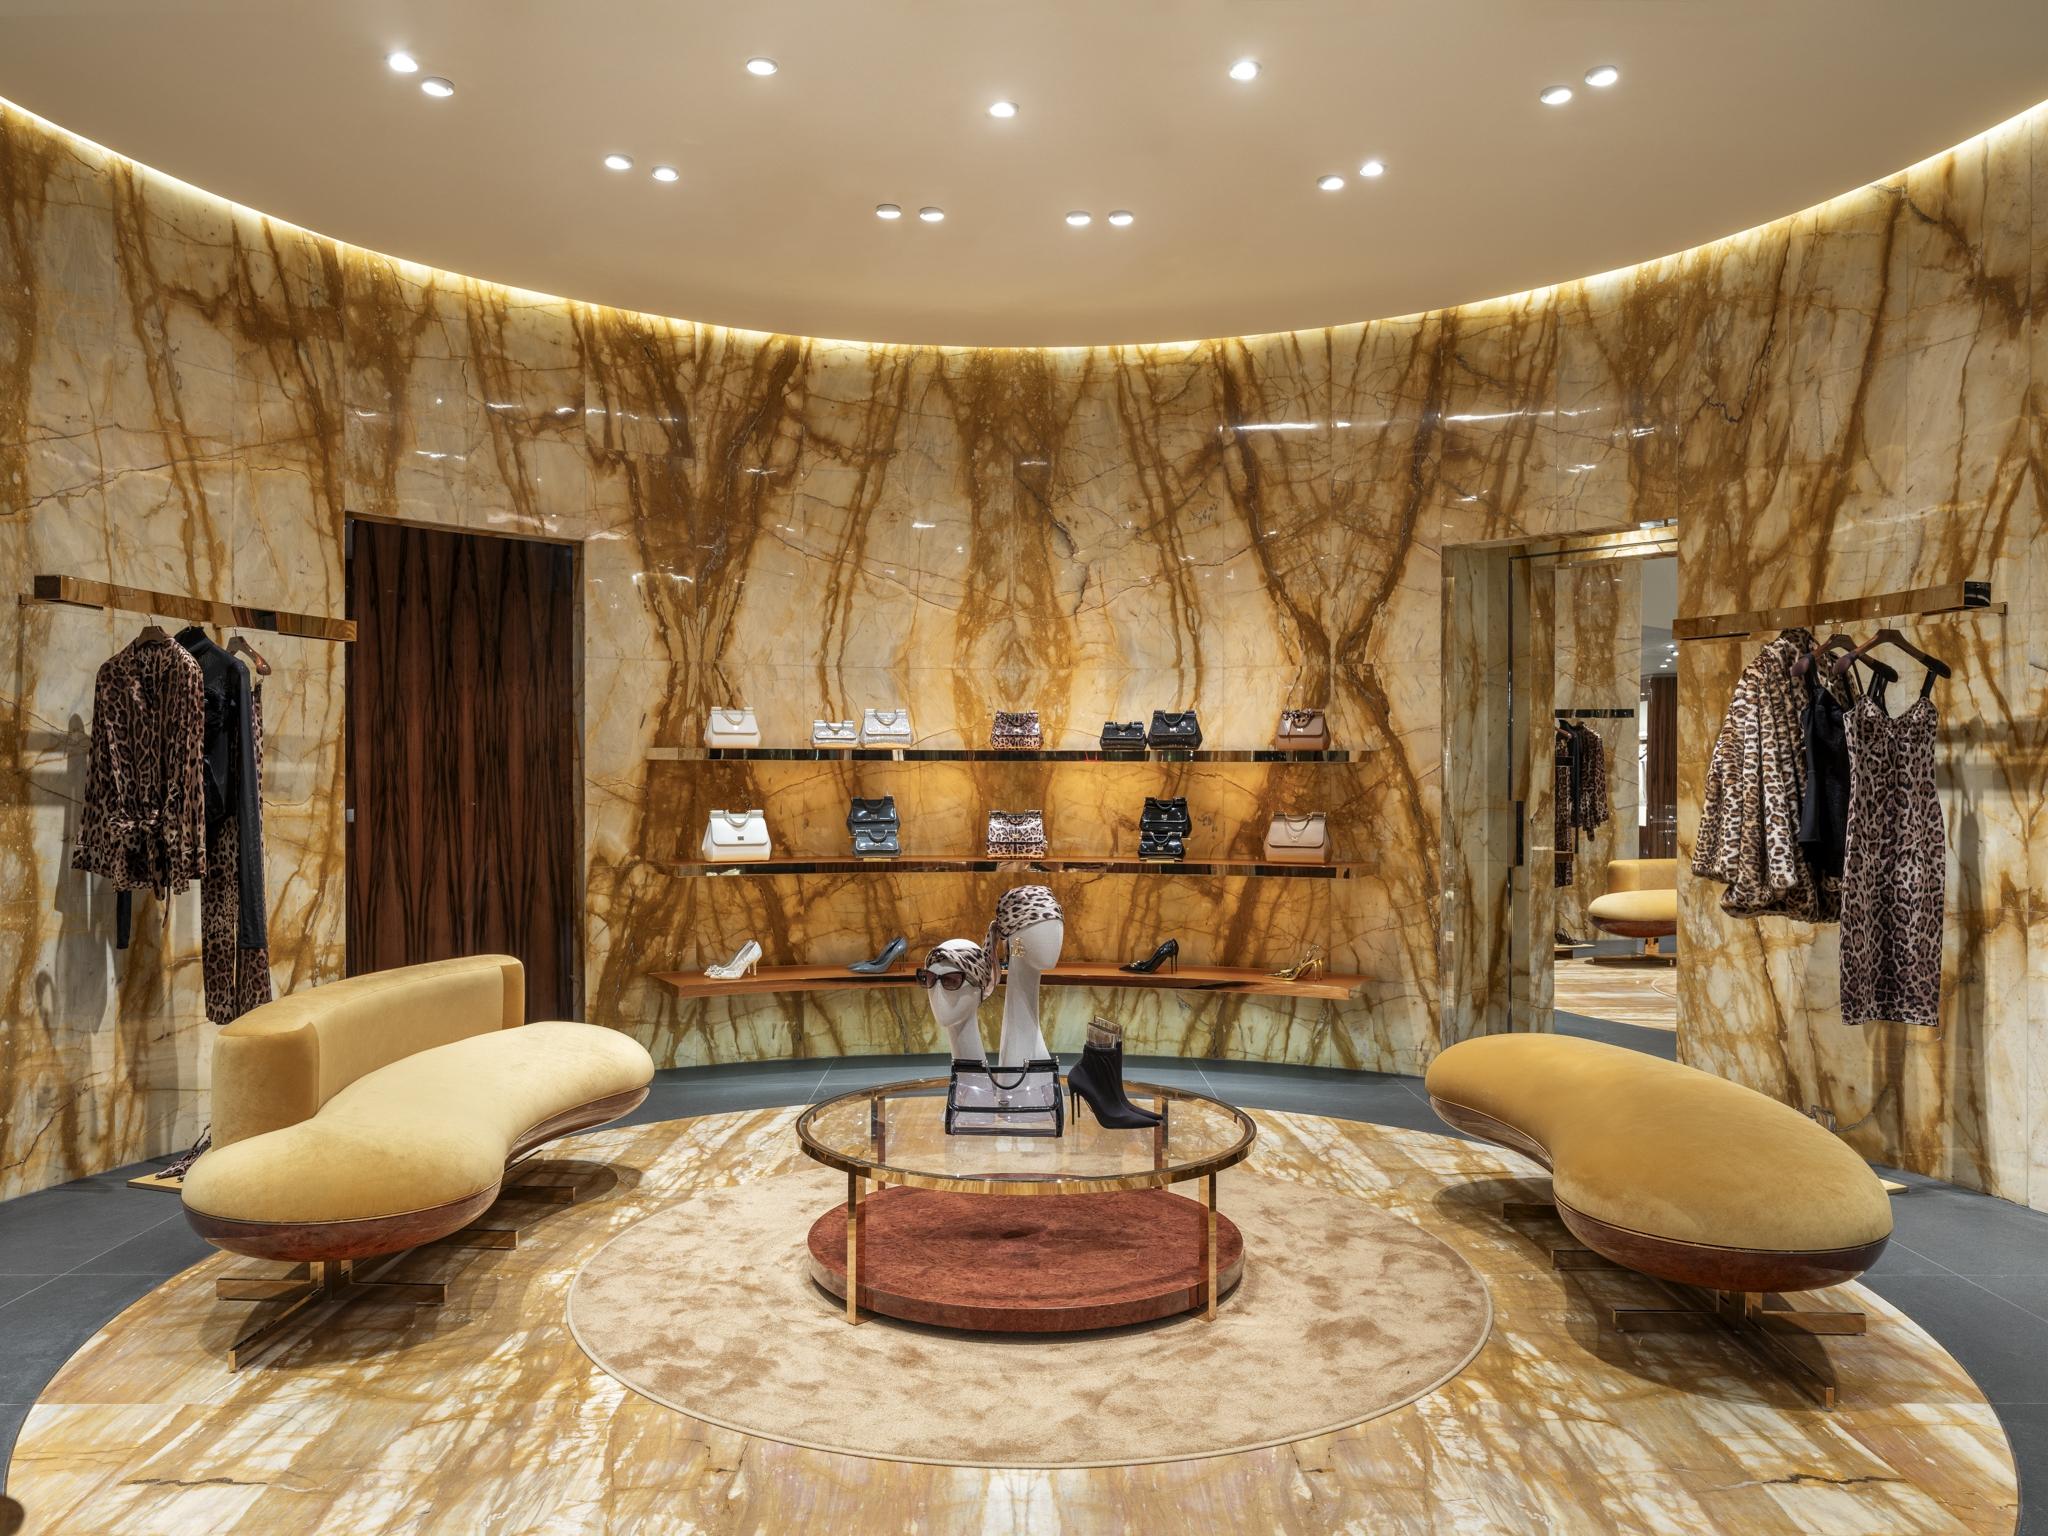 Will the extraordinary boom in luxury goods ever end?